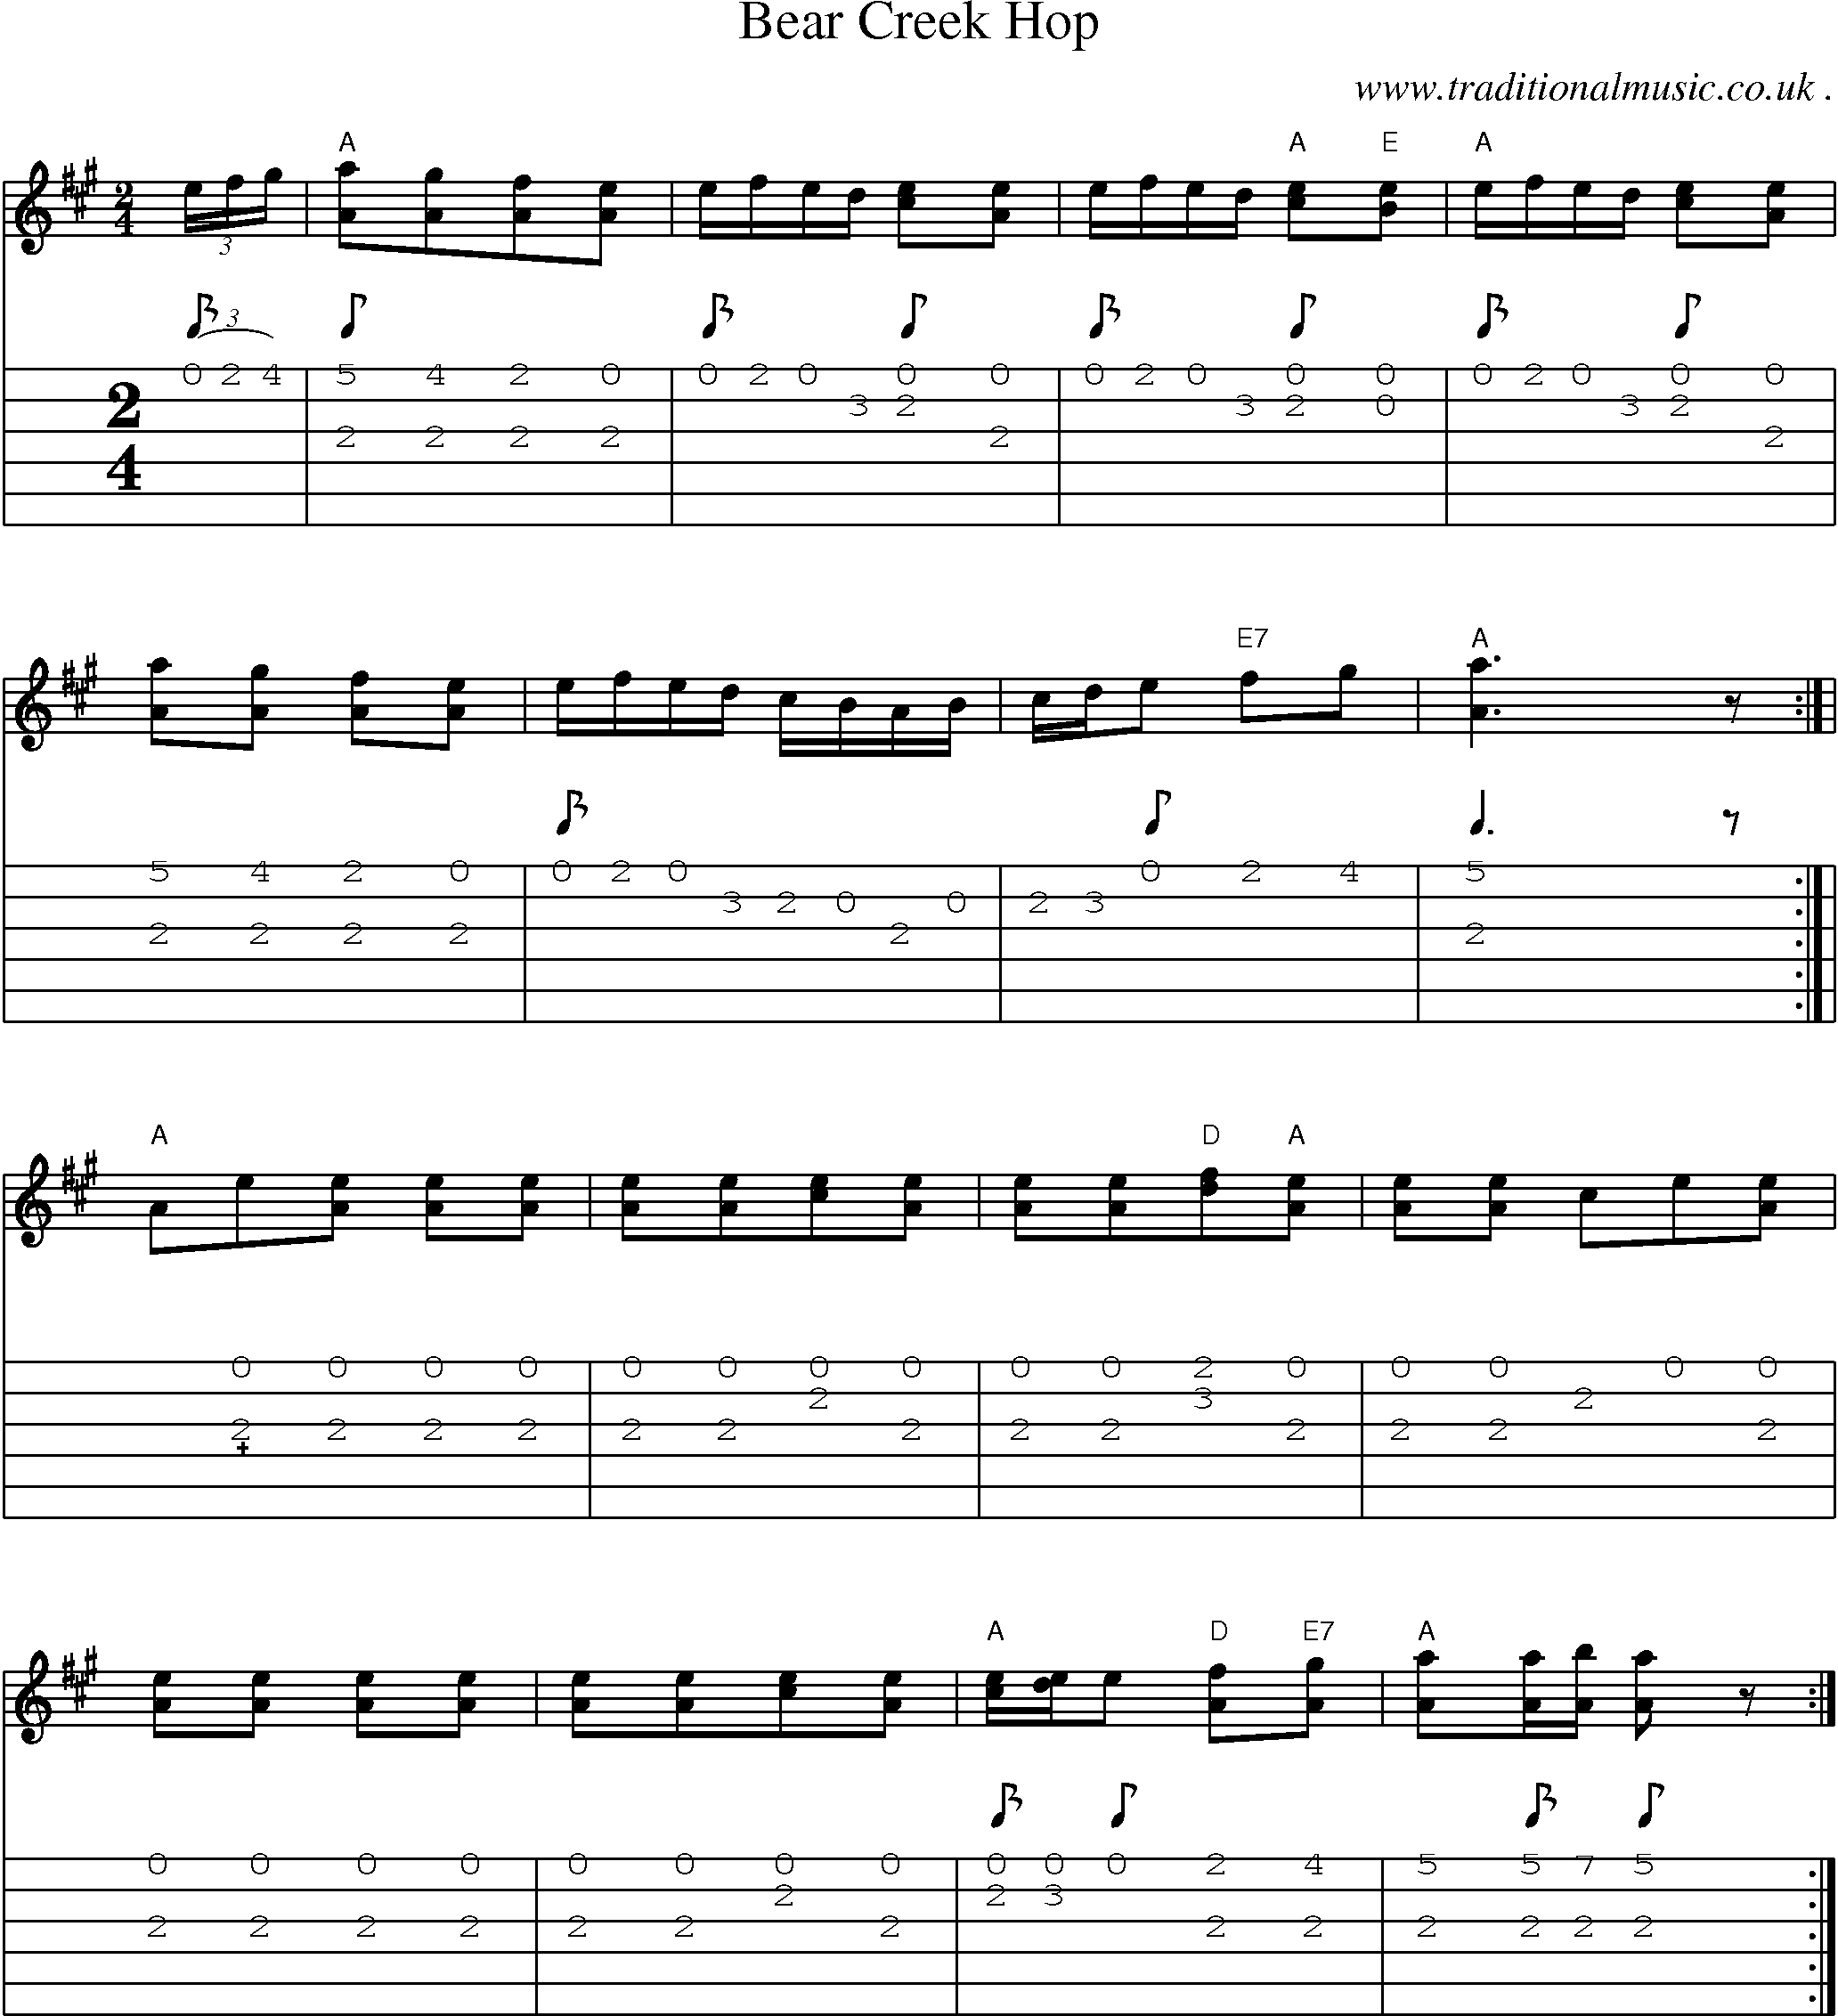 Music Score and Guitar Tabs for Bear Creek Hop